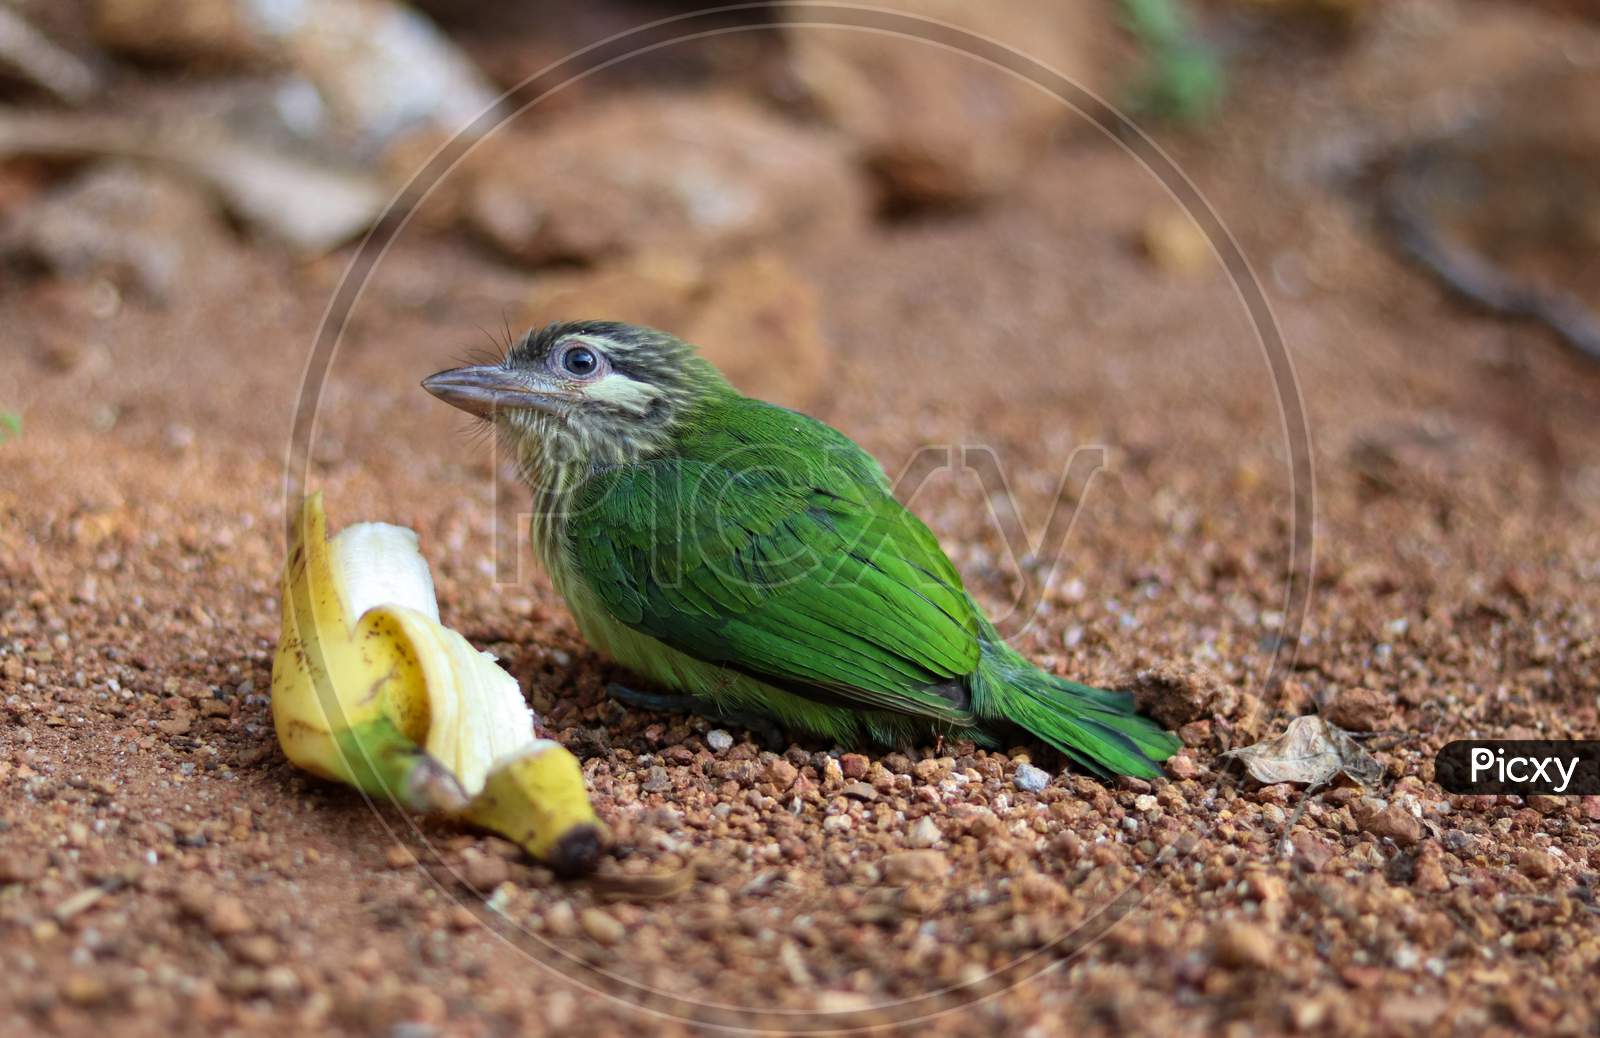 White Cheeked Barbet. The White-Cheeked Barbet Or Small Green Barbet Is A Species Of Barbet Found In Southern India.